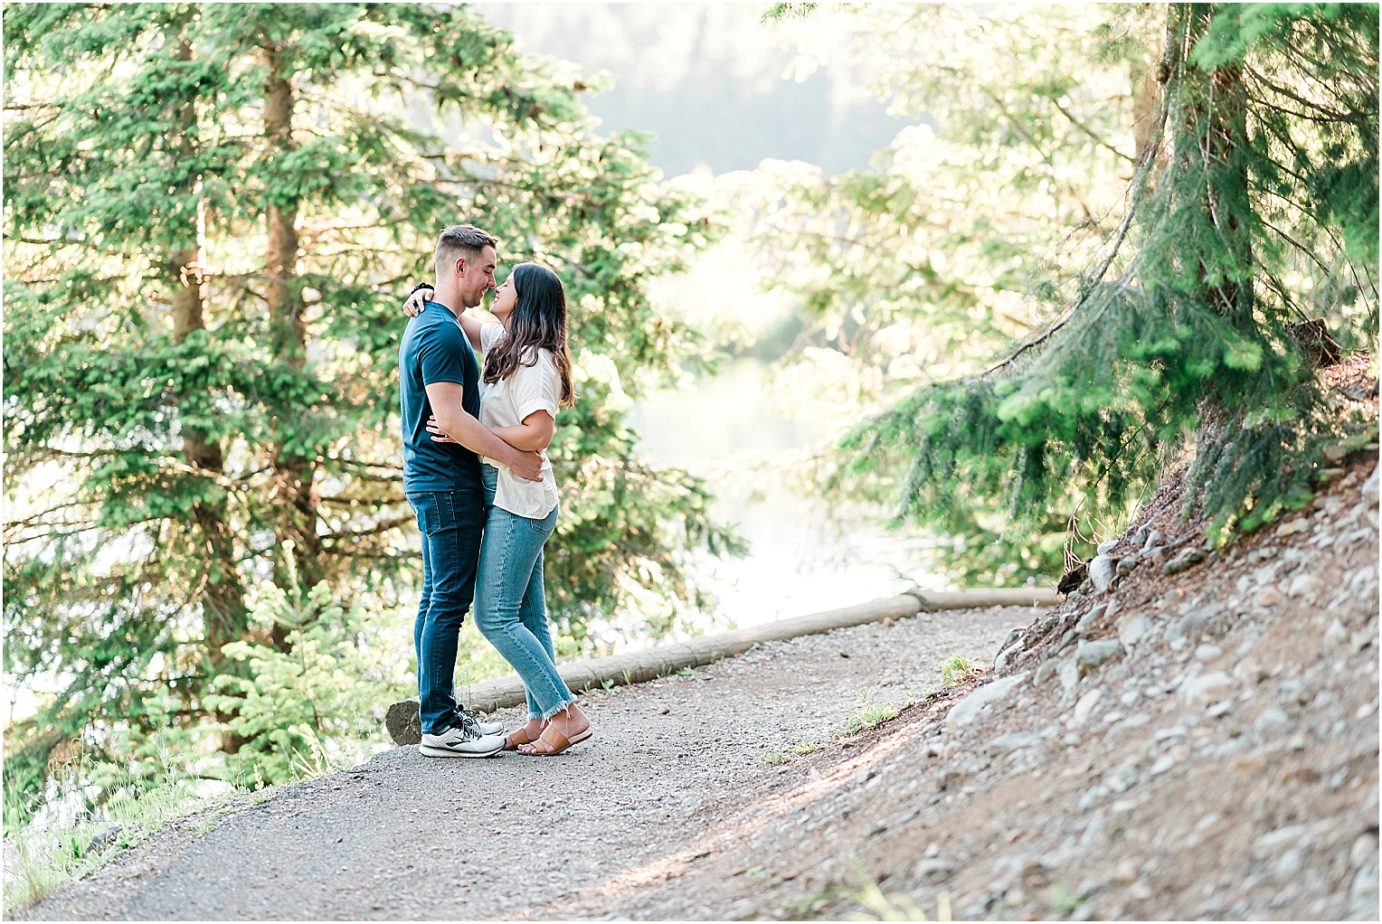 Gold Creek Pond engagement session Jon and Kristen couple standing on trail